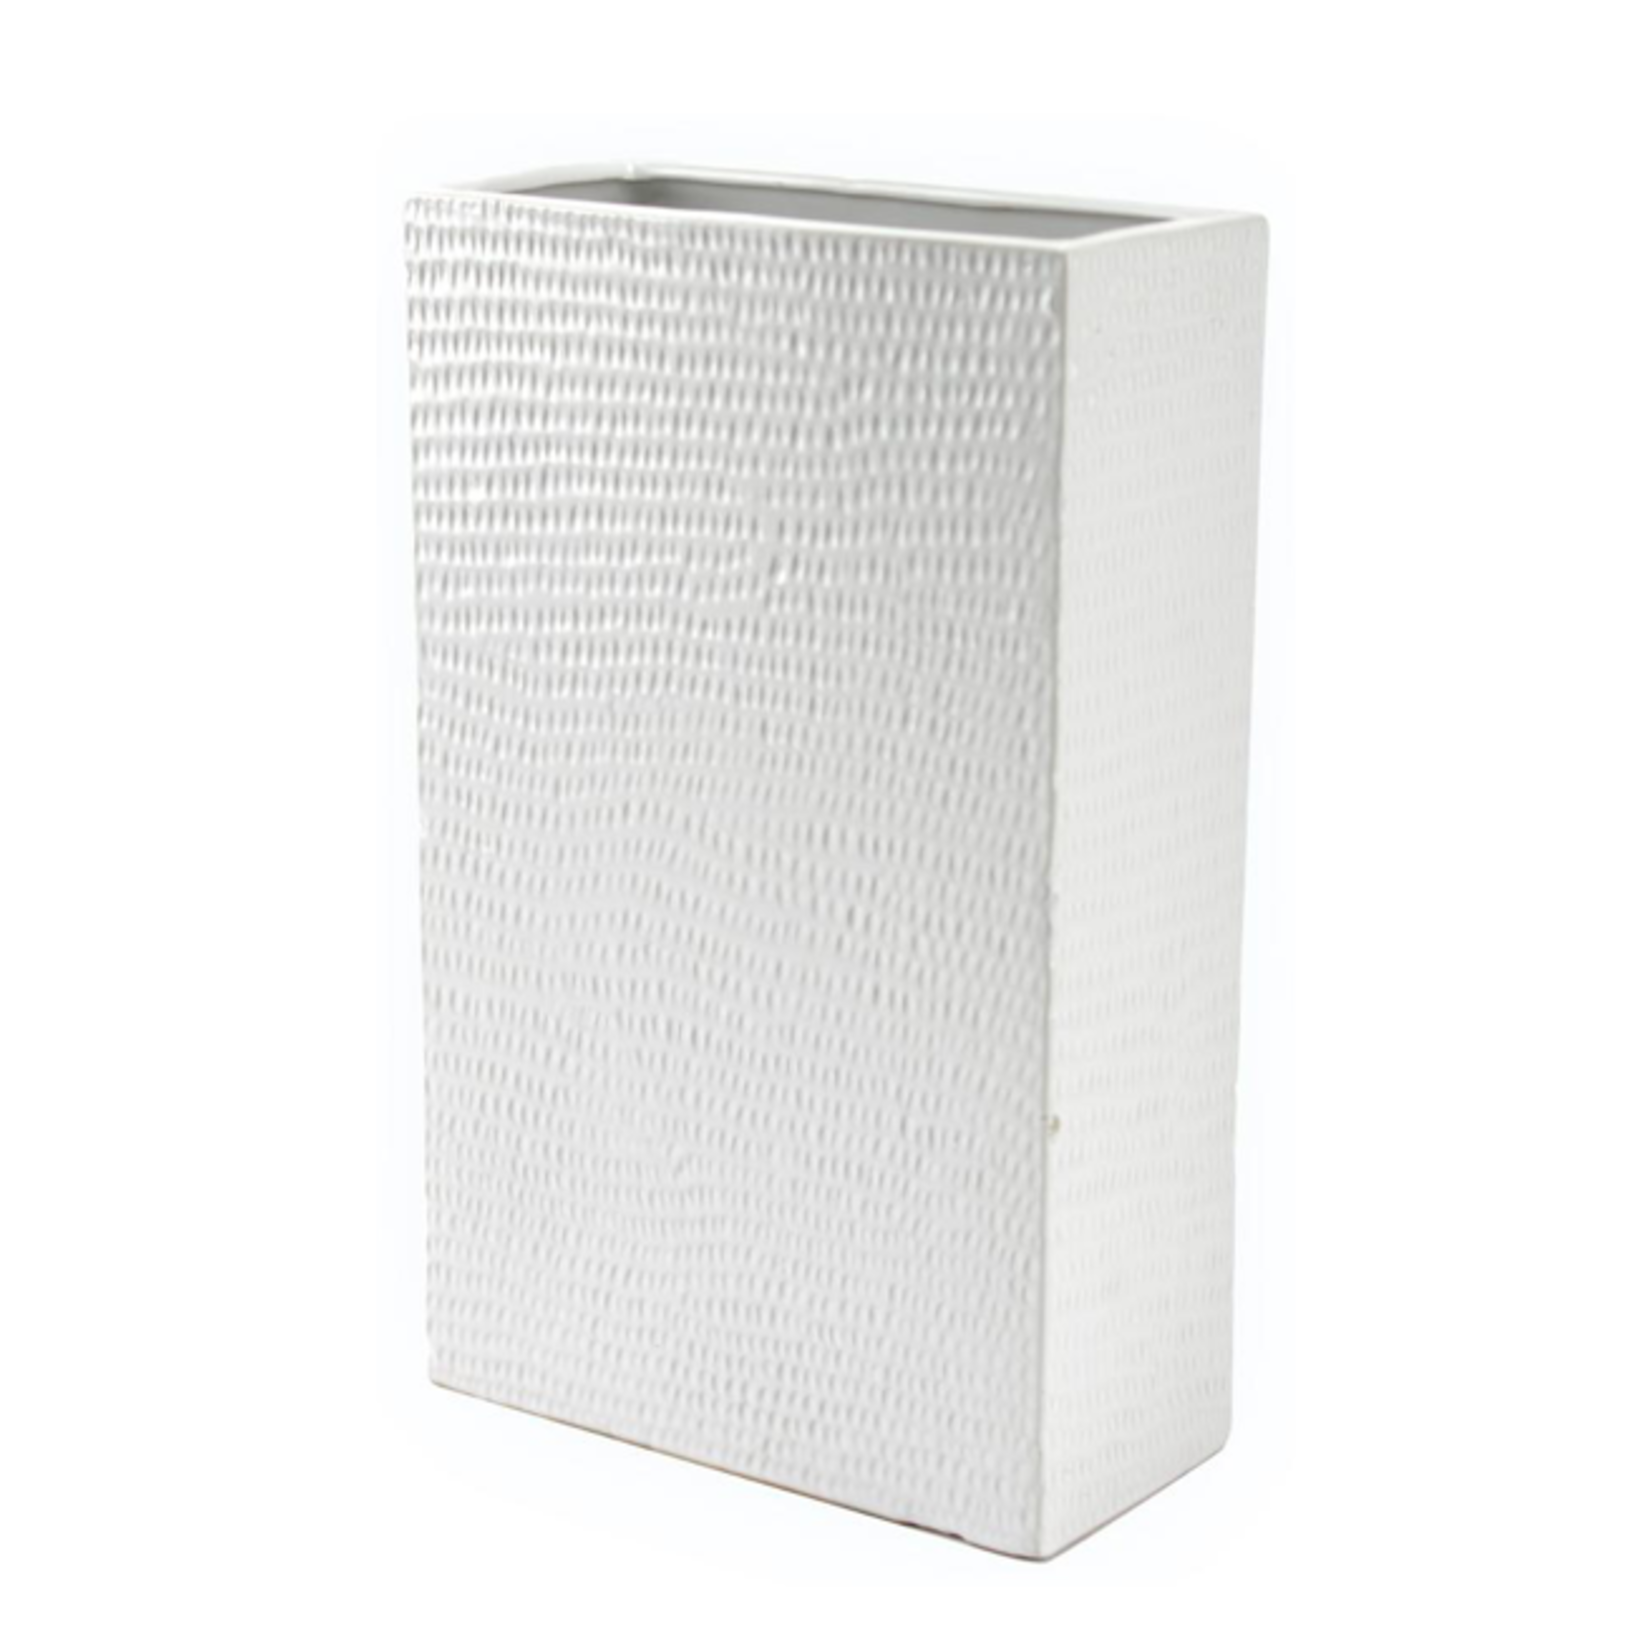 14"H X 8.5" x 4" WHITE CERAMIC TALL RECTANGLE TEXTURED PLANTERS